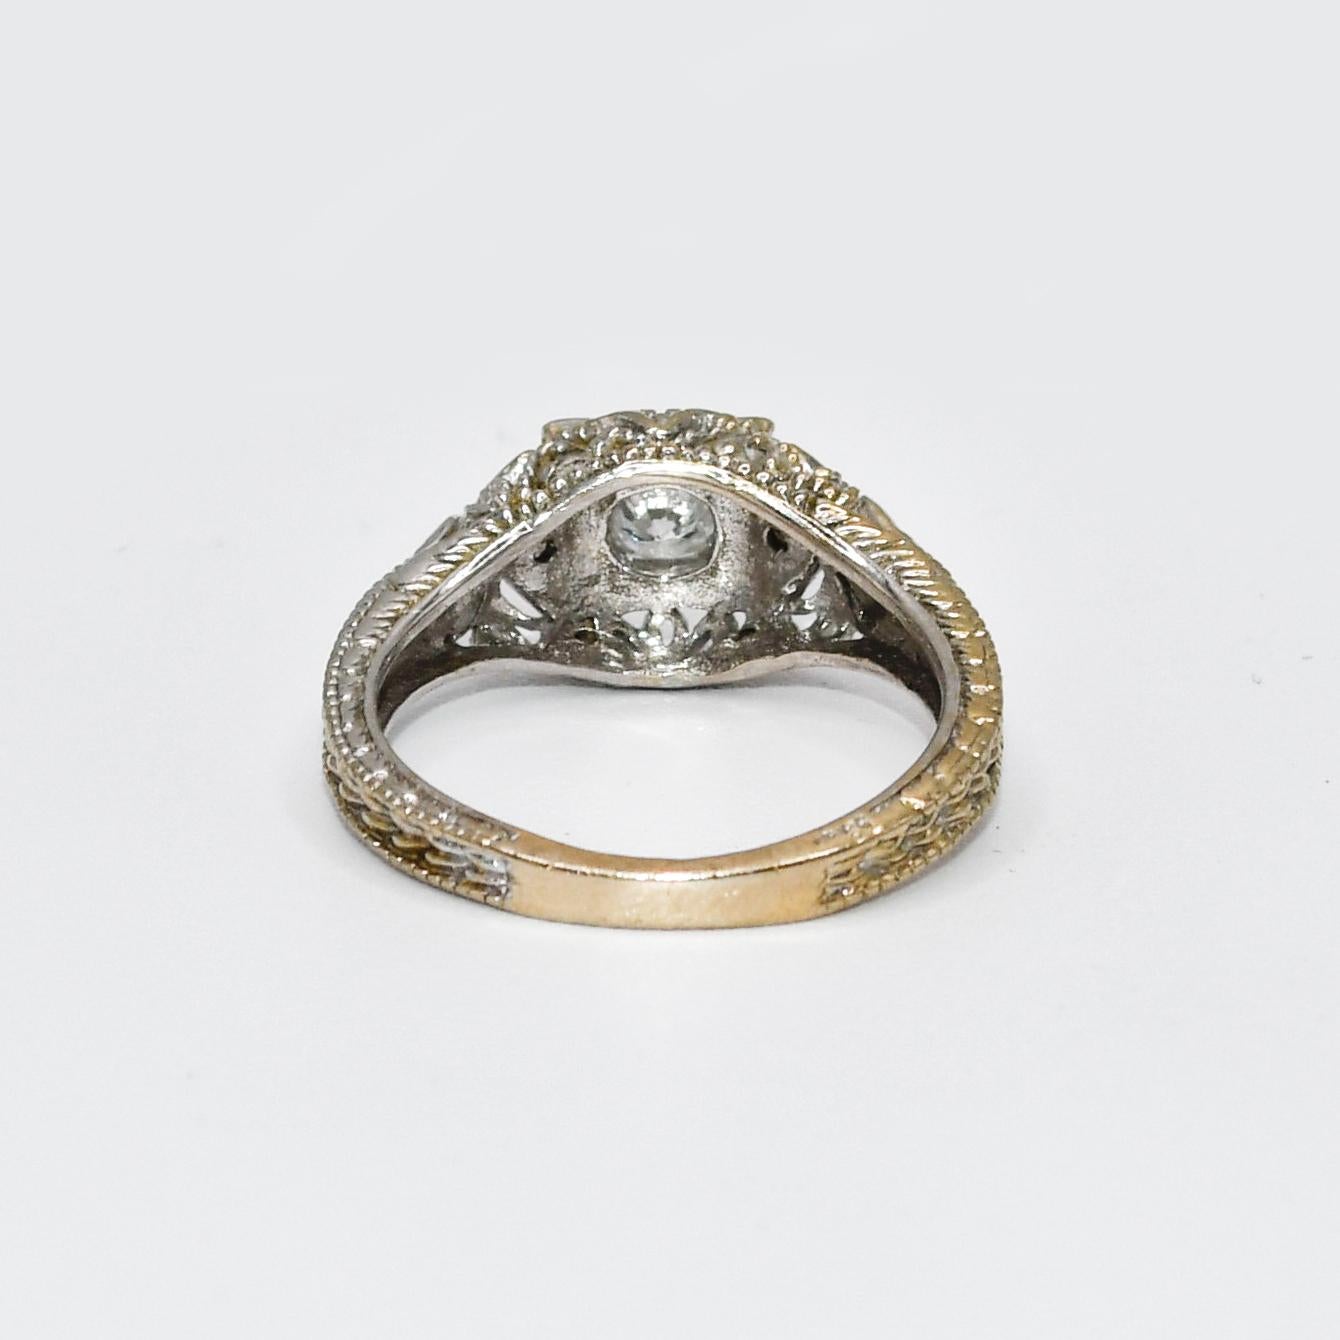 14k White Gold Diamond Ring, .25ct, 4.2gr In Excellent Condition For Sale In Laguna Beach, CA